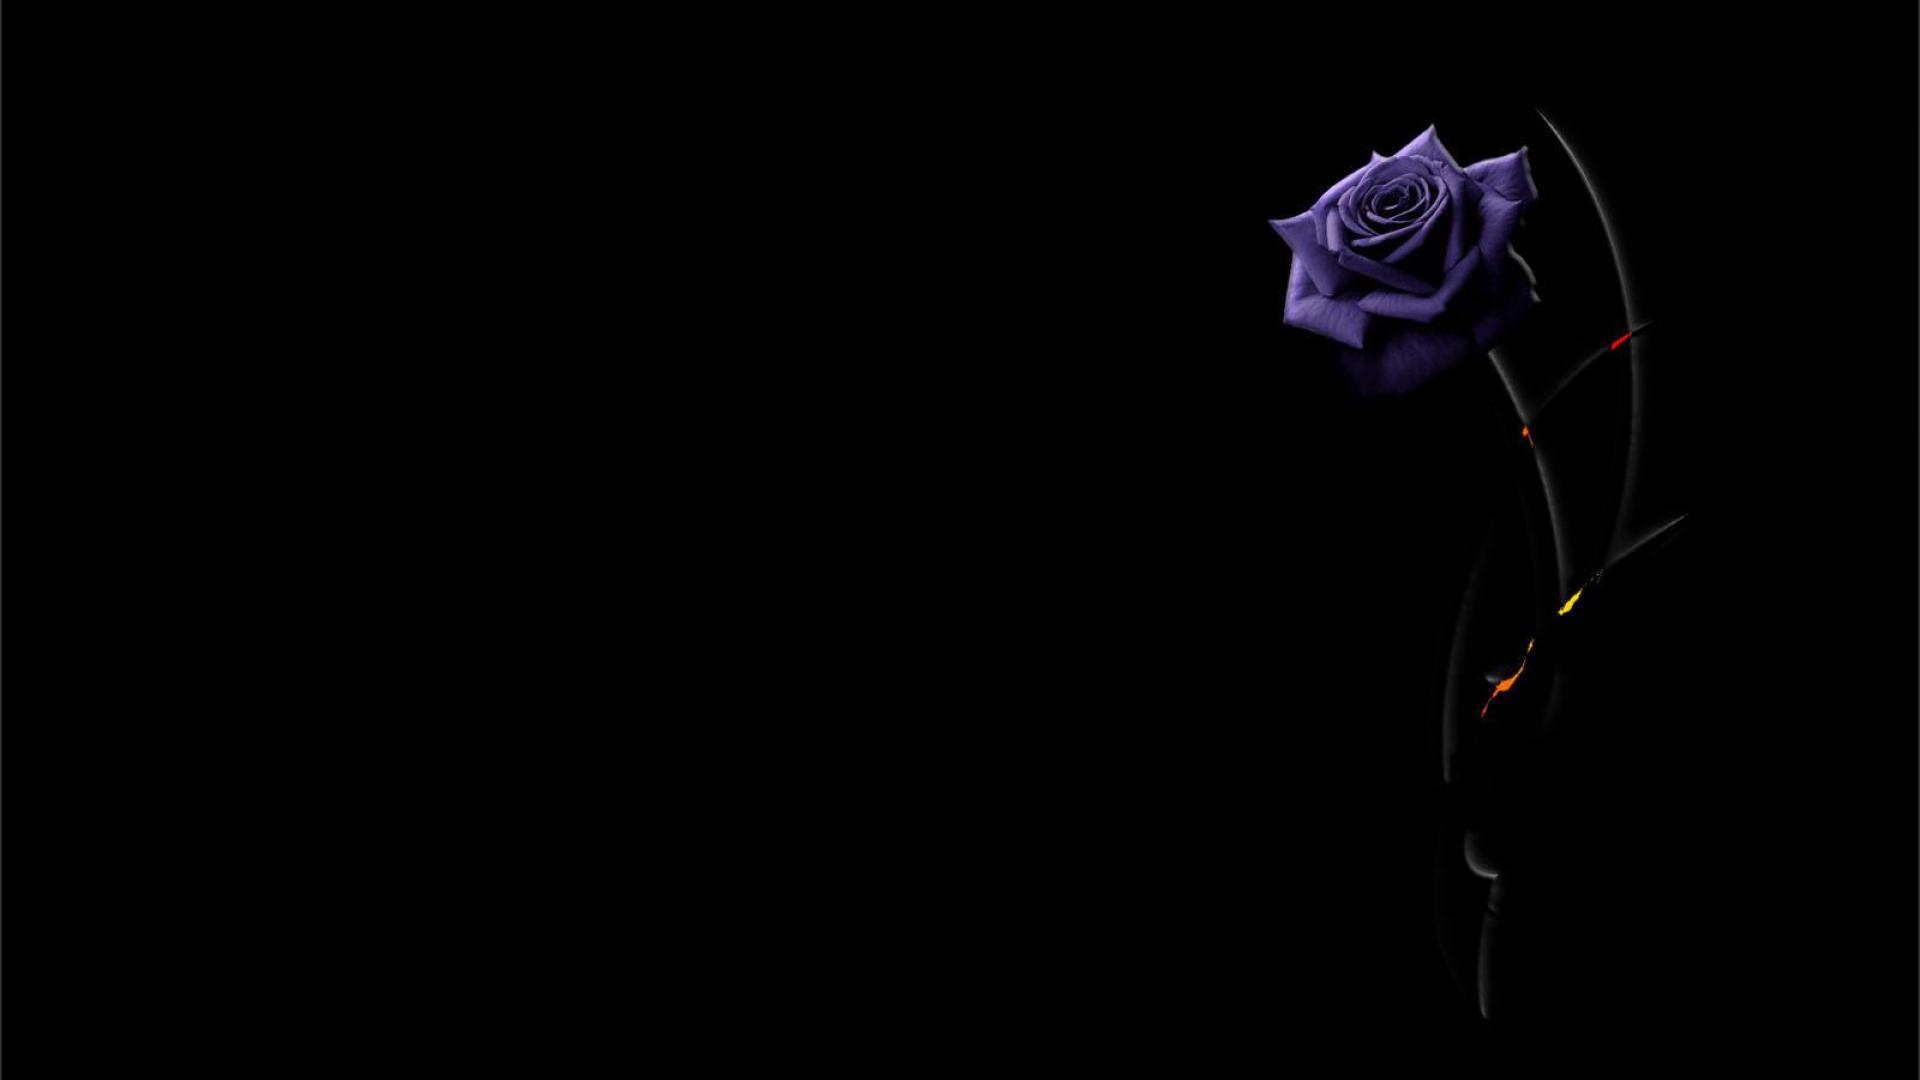 Purple Rose On A Black Background Wallpaper And Image